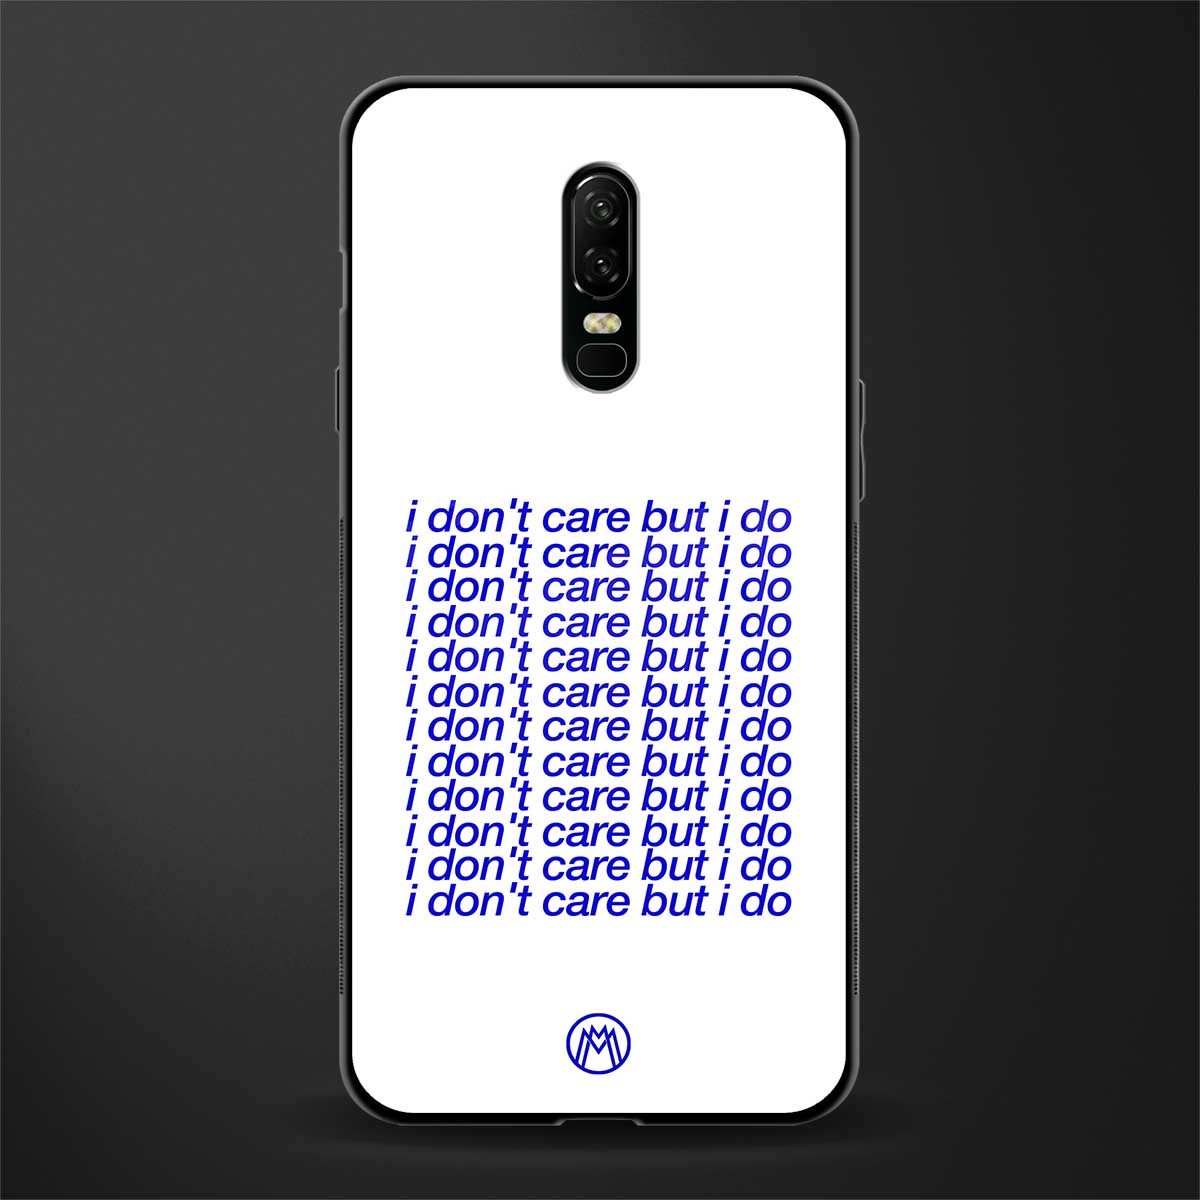 i don't care but i do glass case for oneplus 6 image